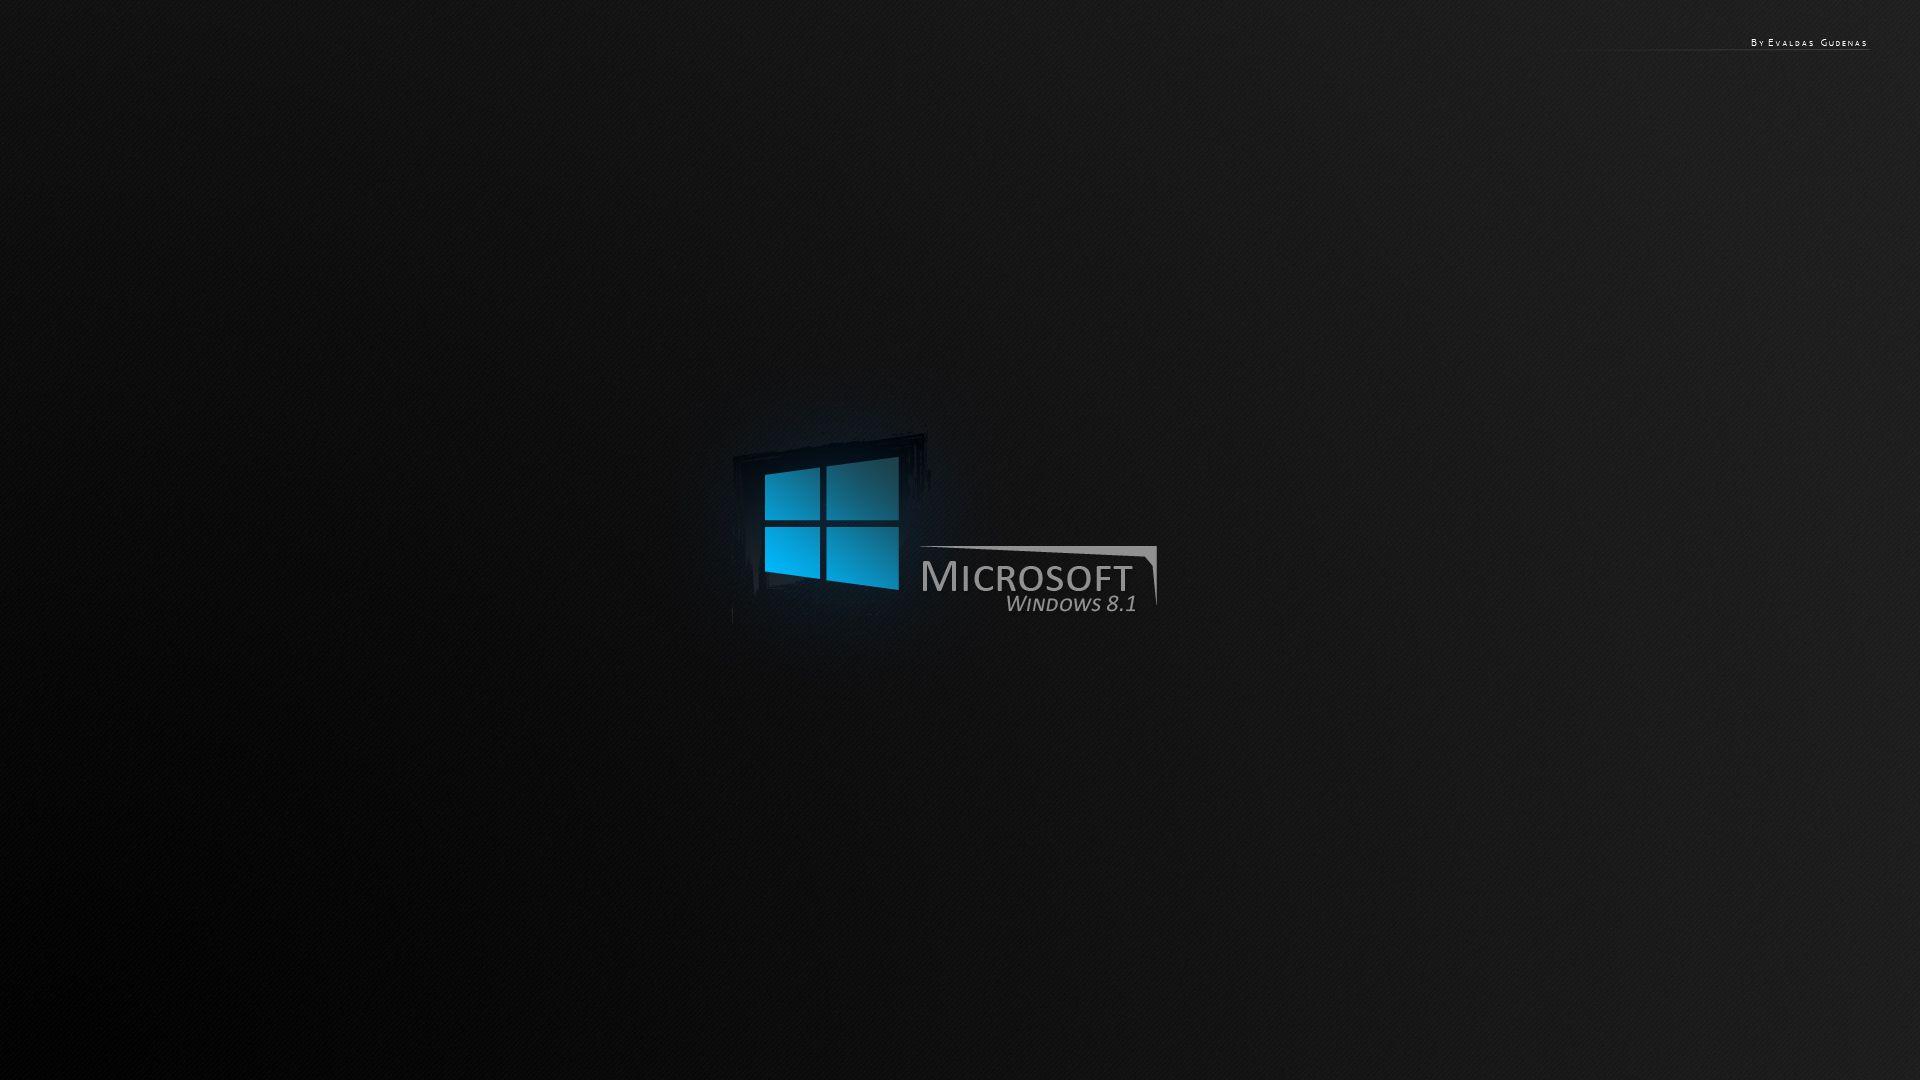 Windows 8.1 Wallpaper and Background Image